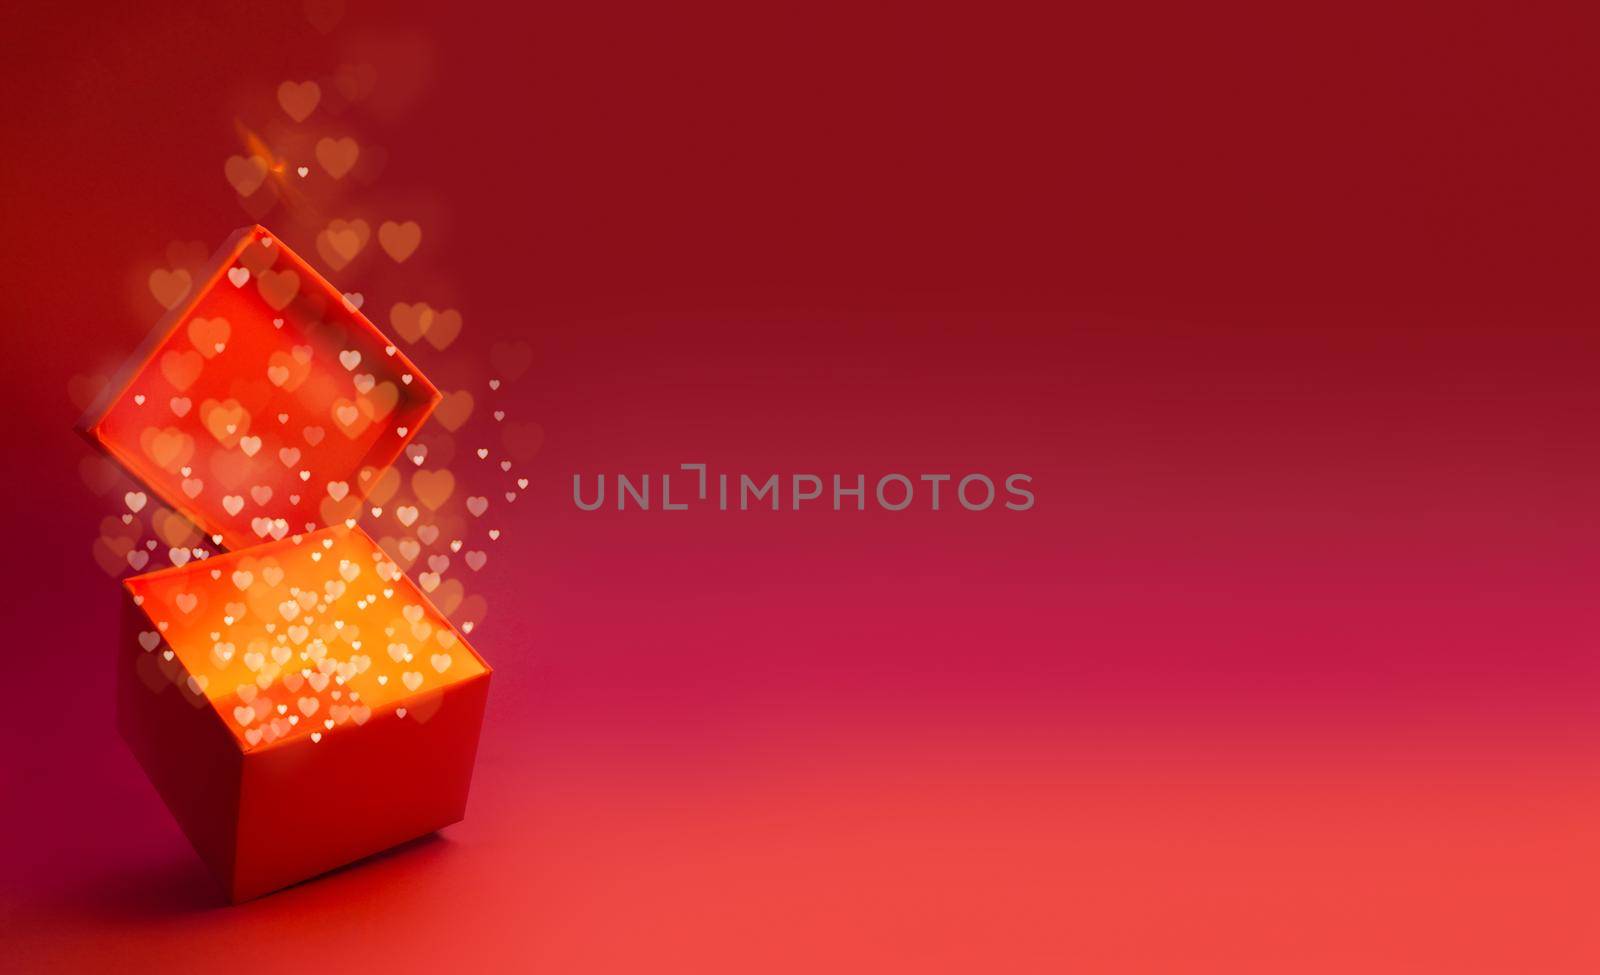 Magic box with love gift for Valentines day, pink red glowing with light from inside with bokeh hearts on glitter background with copy space for text